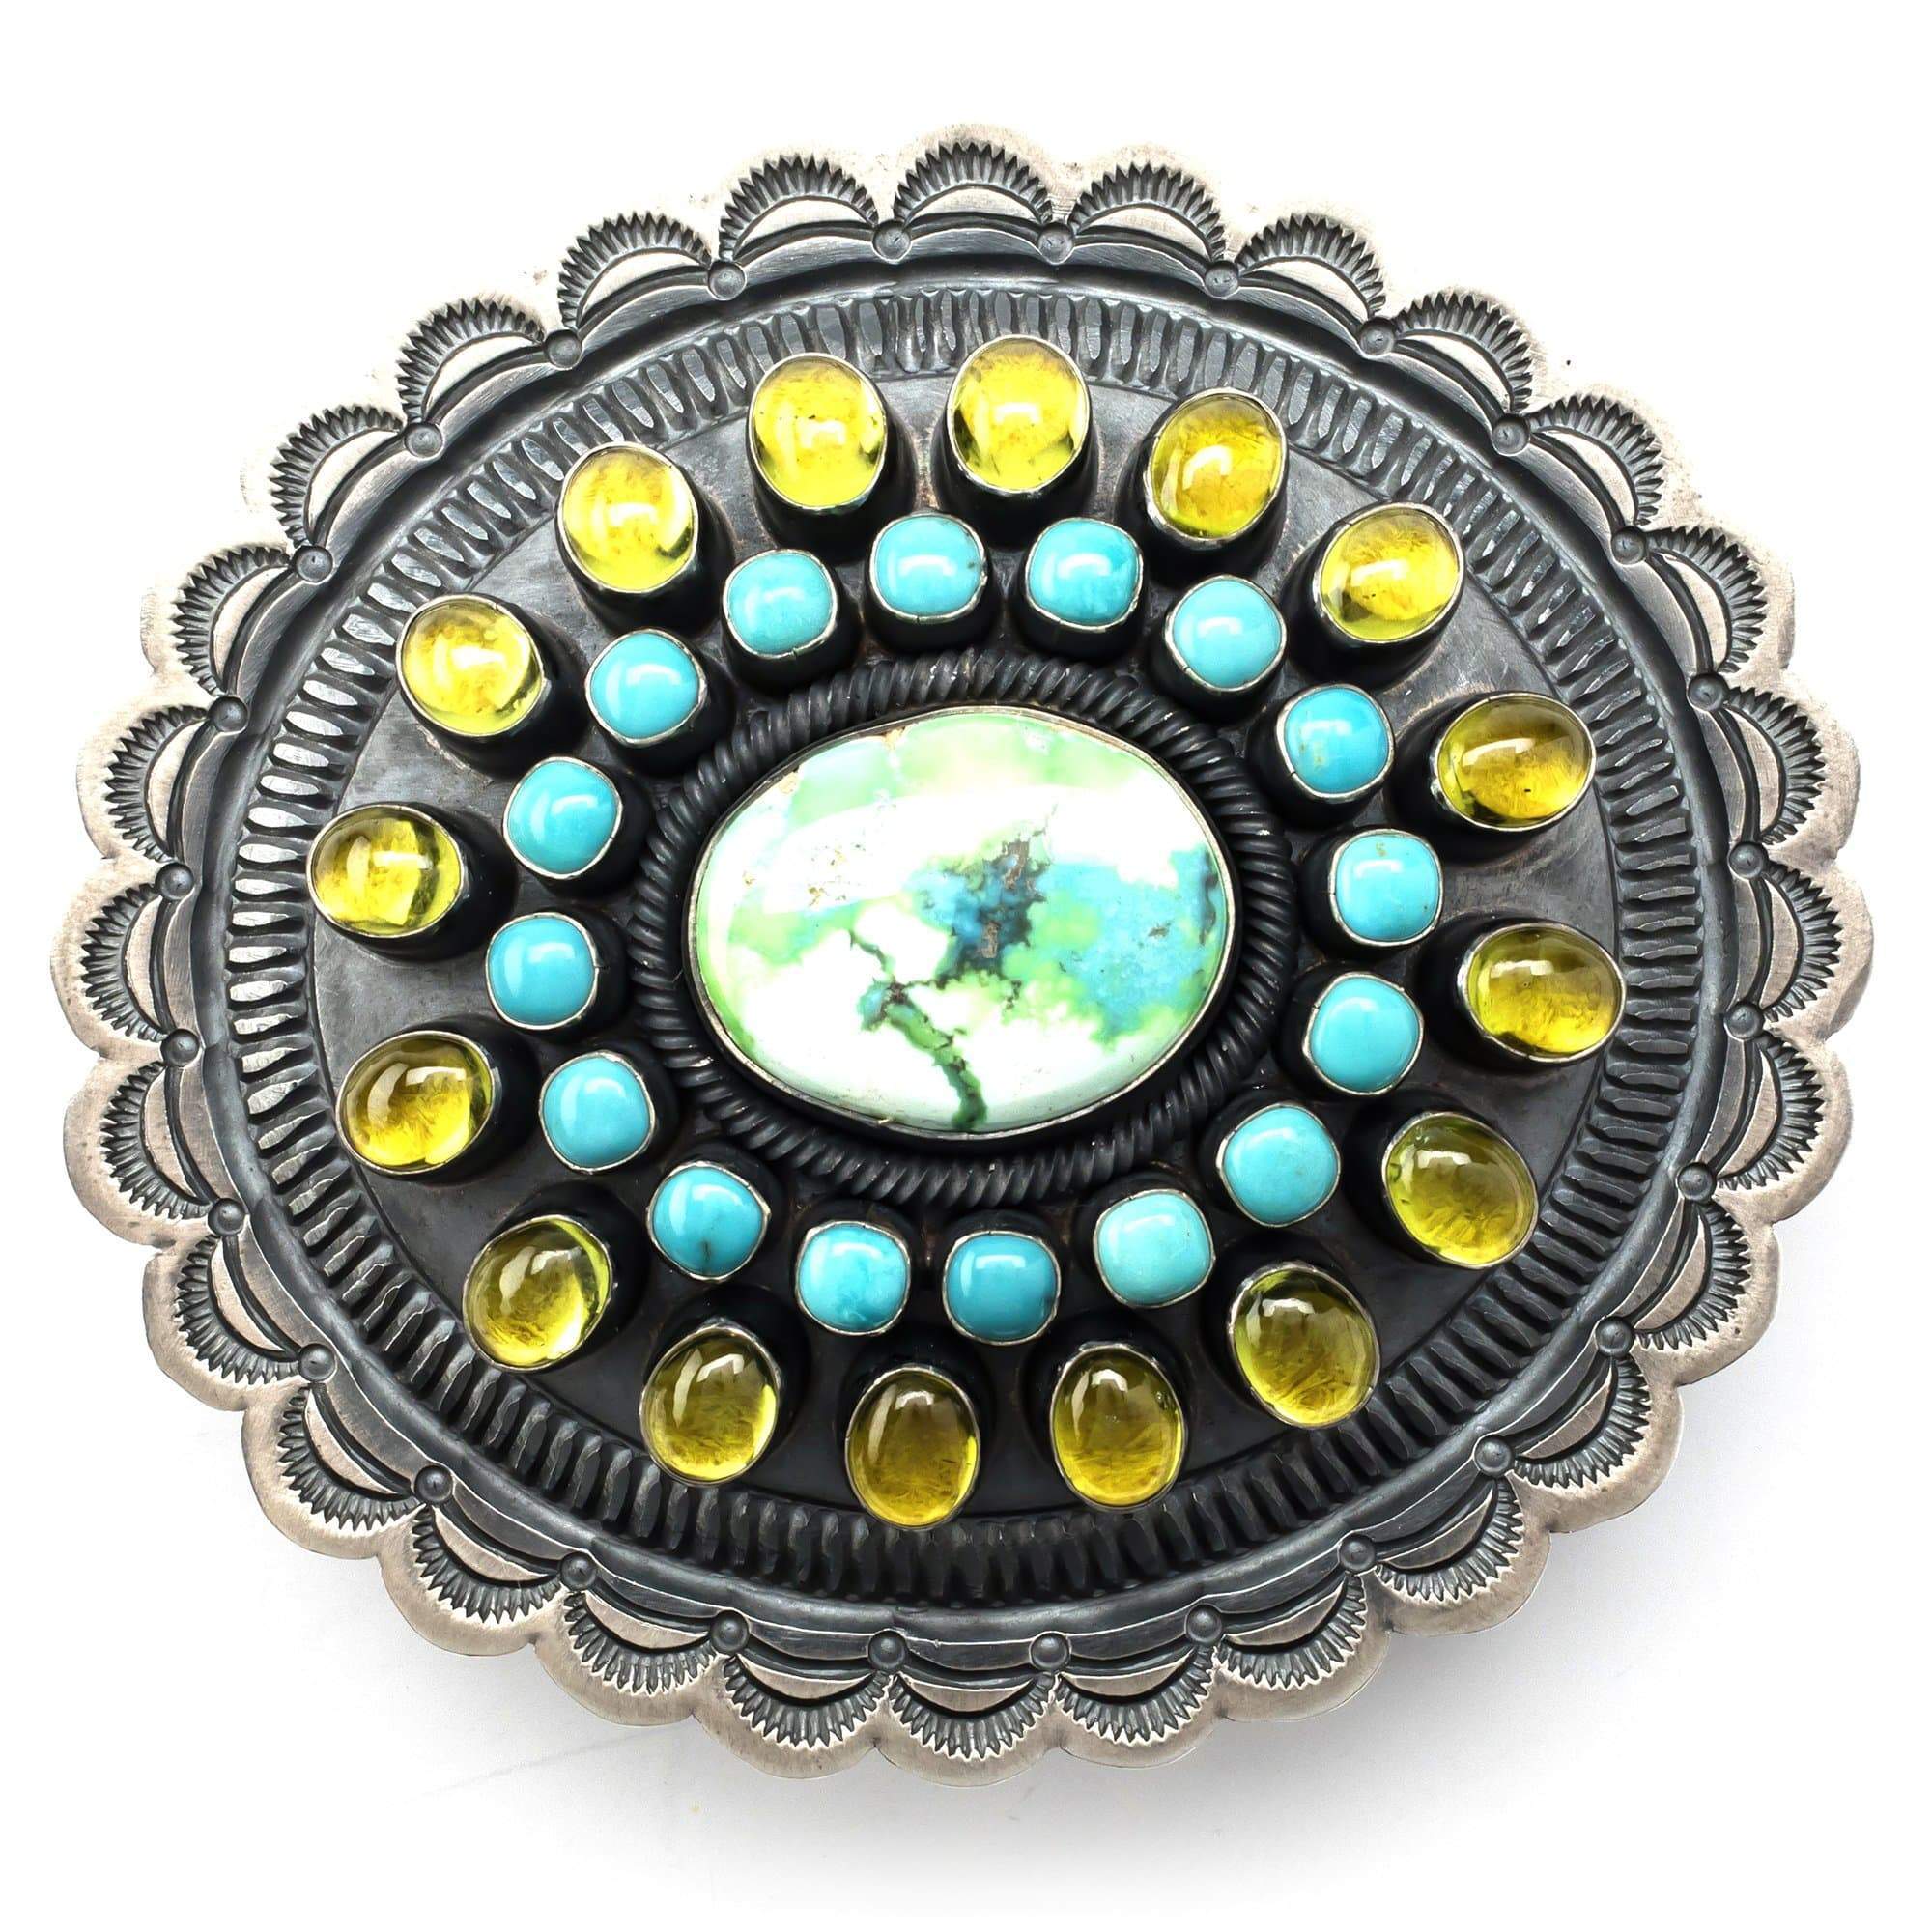 Kalifano Native American Jewelry Ernest Roy Begay Carico and Kingman Turquoise USA Native American Made 925 Sterling Silver Concito Buckle NACB3900.001